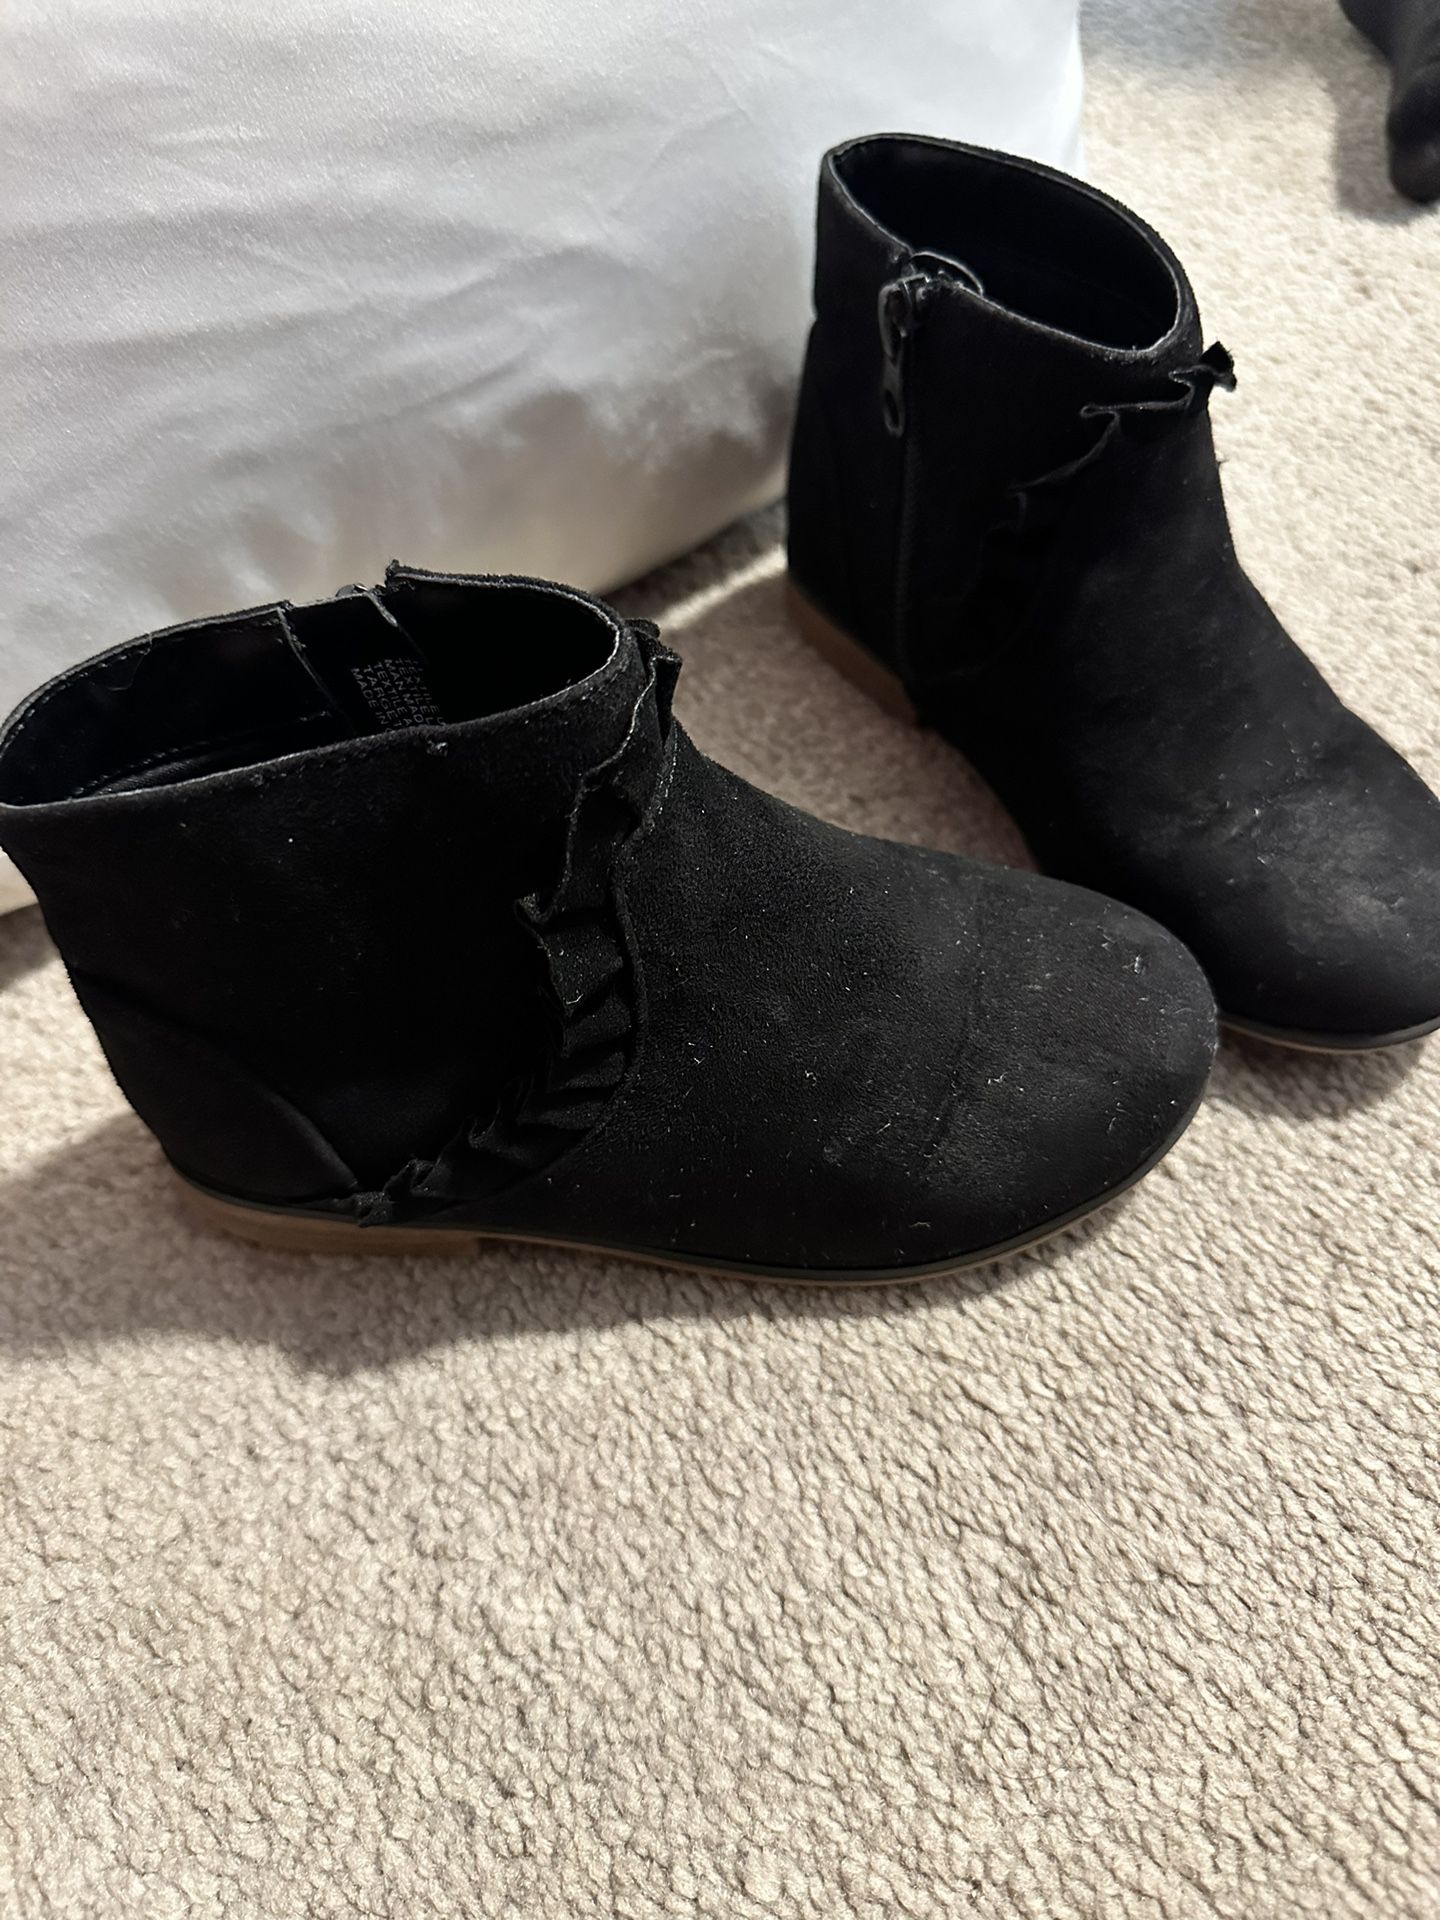 Girl Suede Boots Size 11 (Free W/Purchase)